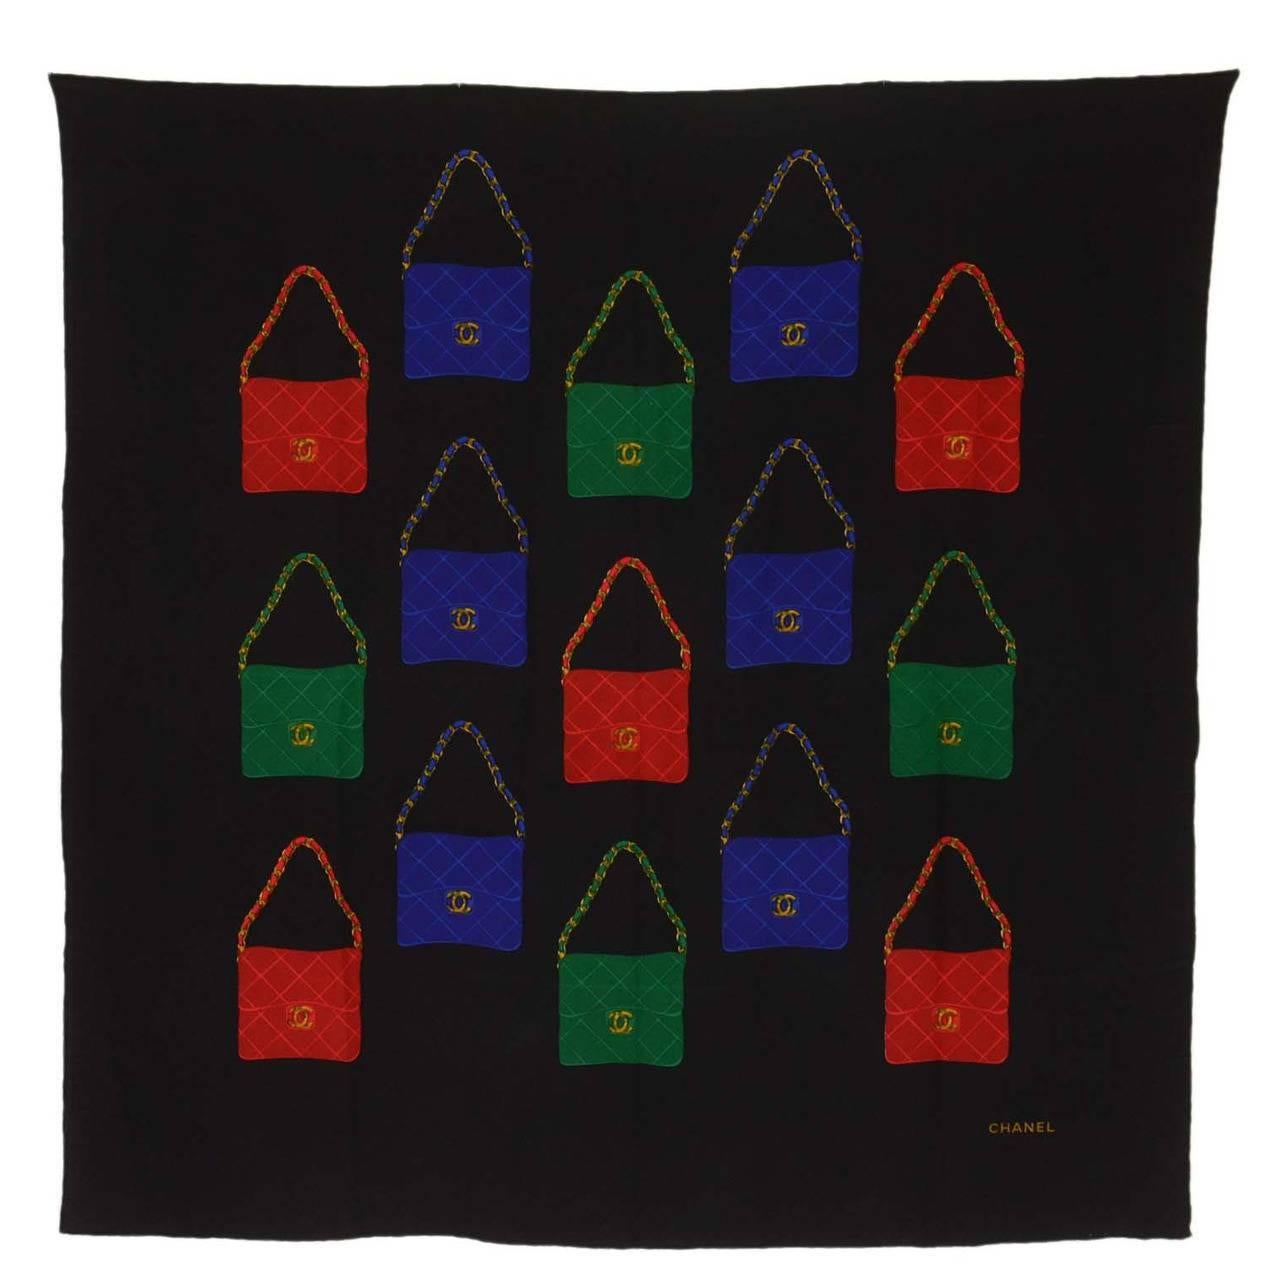 CHANEL Black Silk Scarf w/Blue Red and Green Chanel Classic Bags